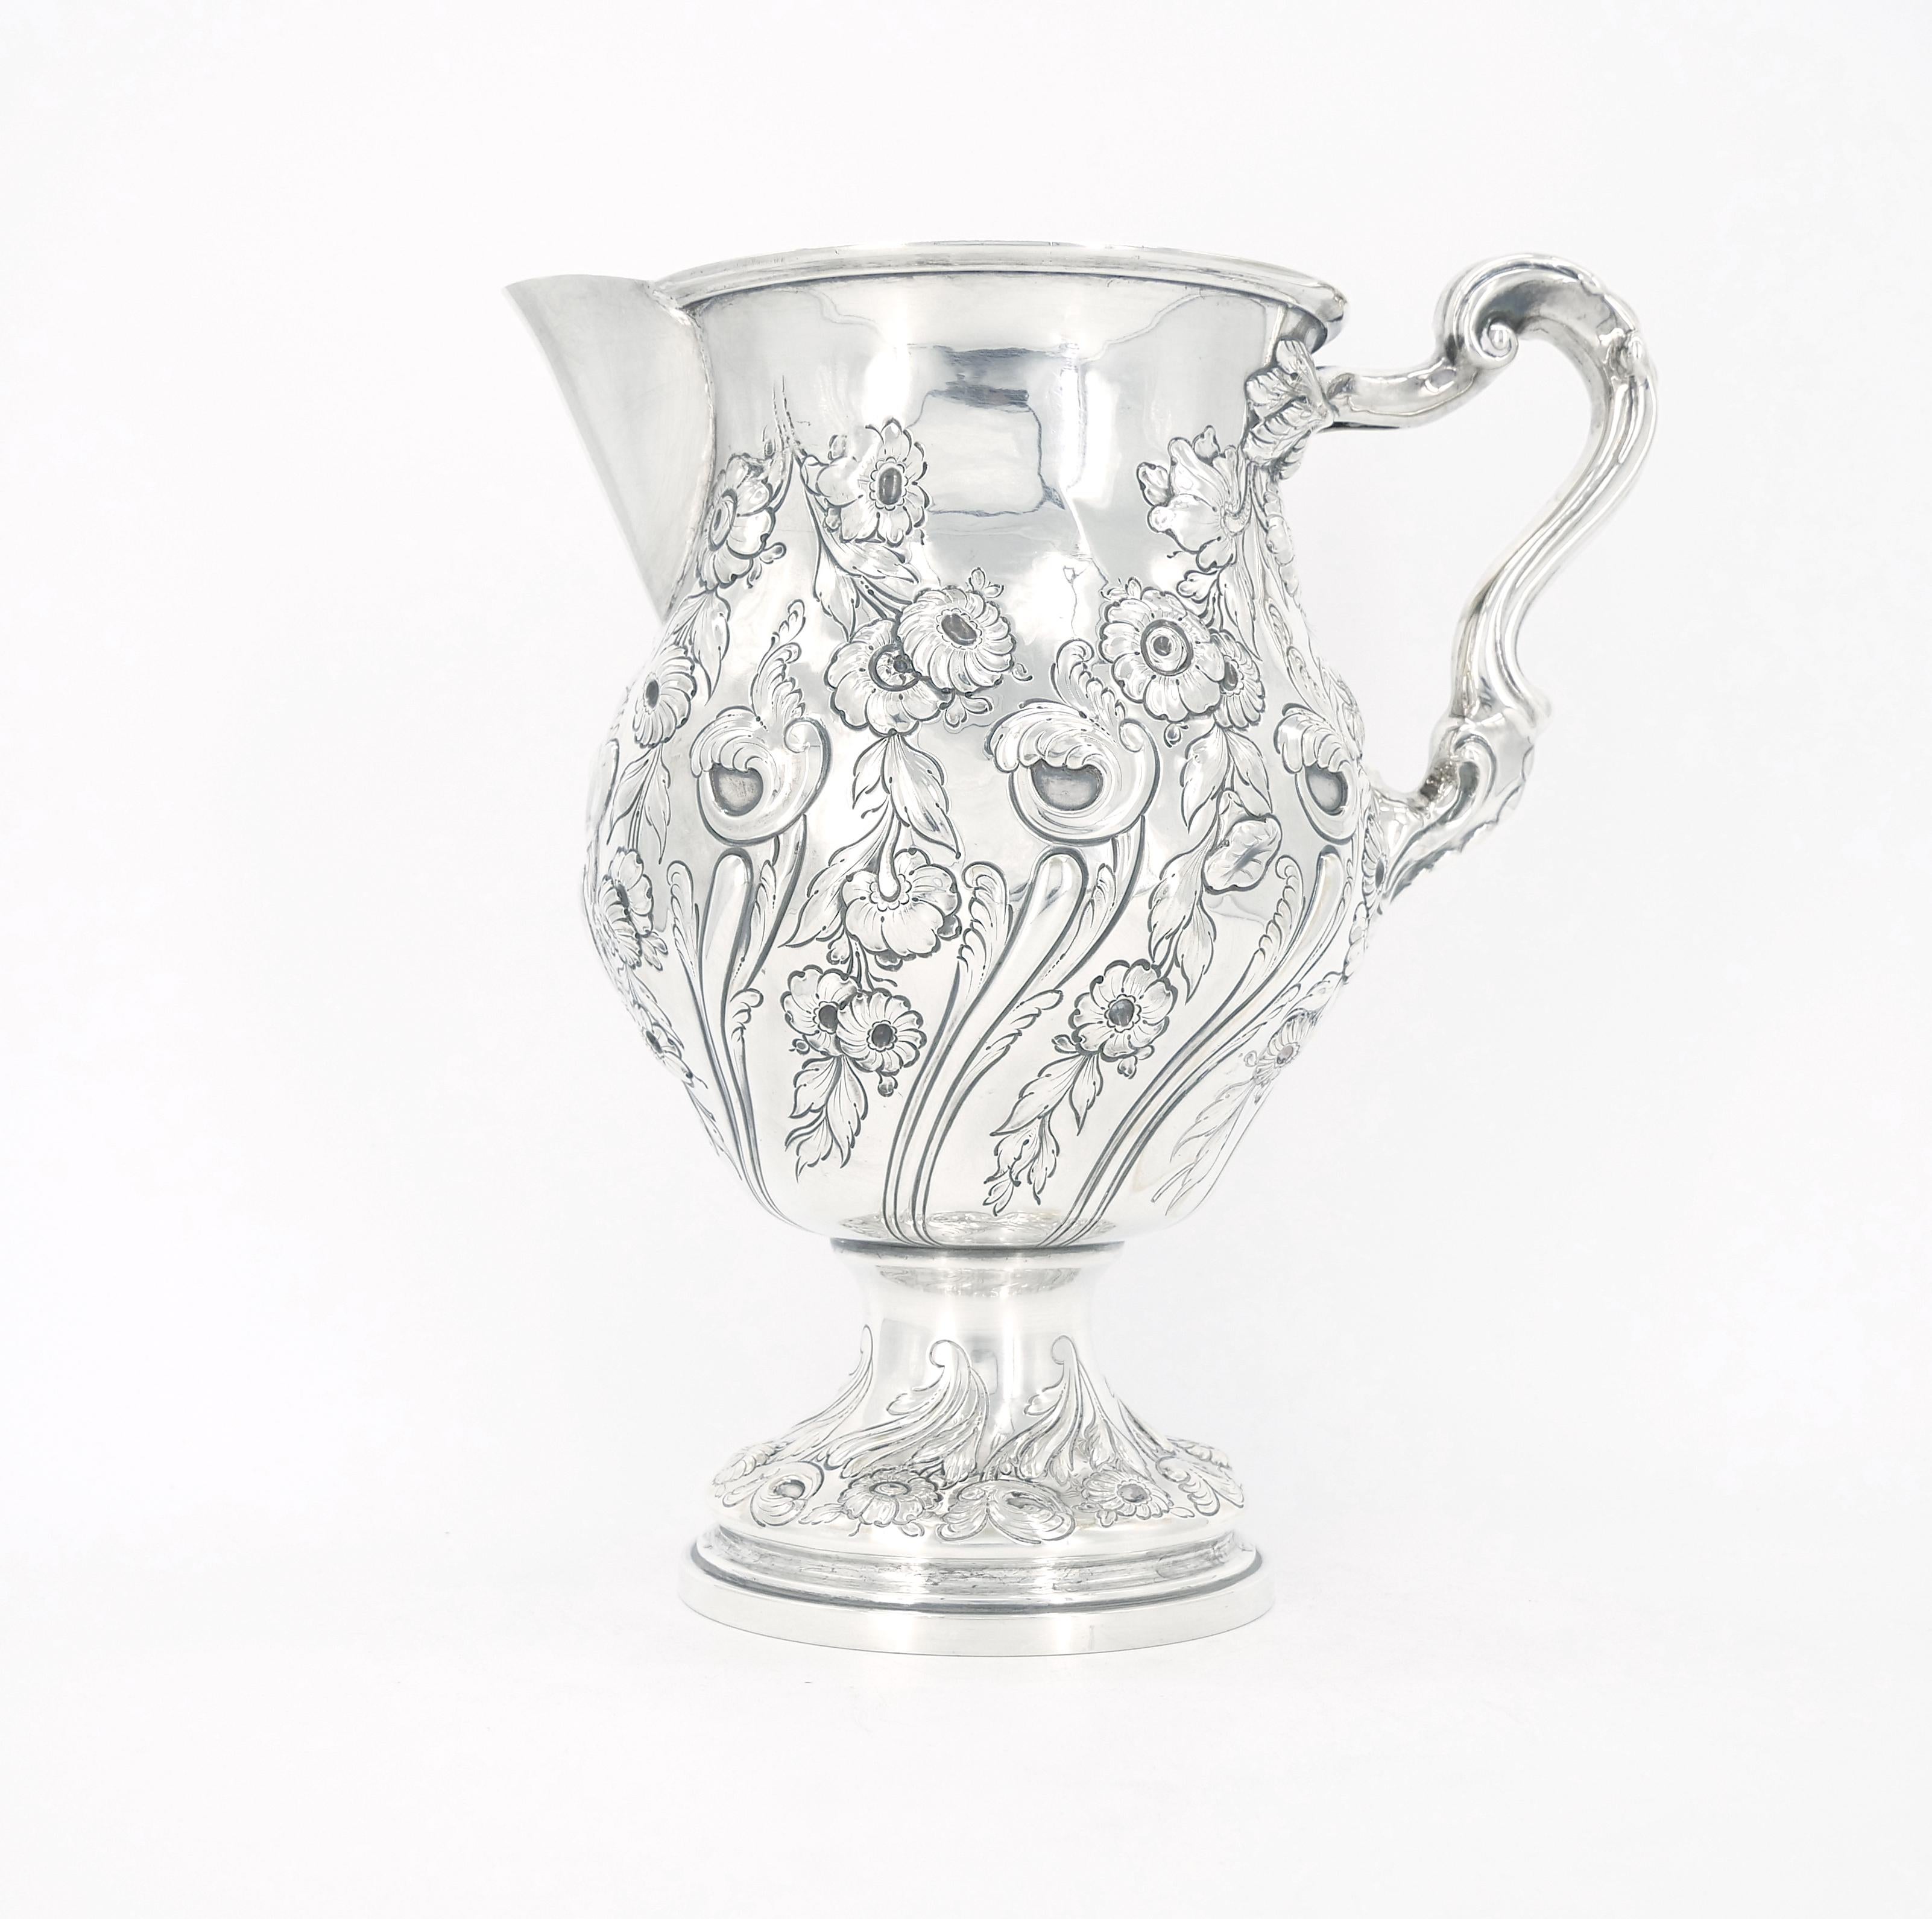 
Behold the resplendent beauty of this magnificent 19th century victorian style Black Starr Forest sterling silver tableware water pitcher. Immerse yourself in the opulent of a bygone era as you witness the exquisite craftsmanship and intricate